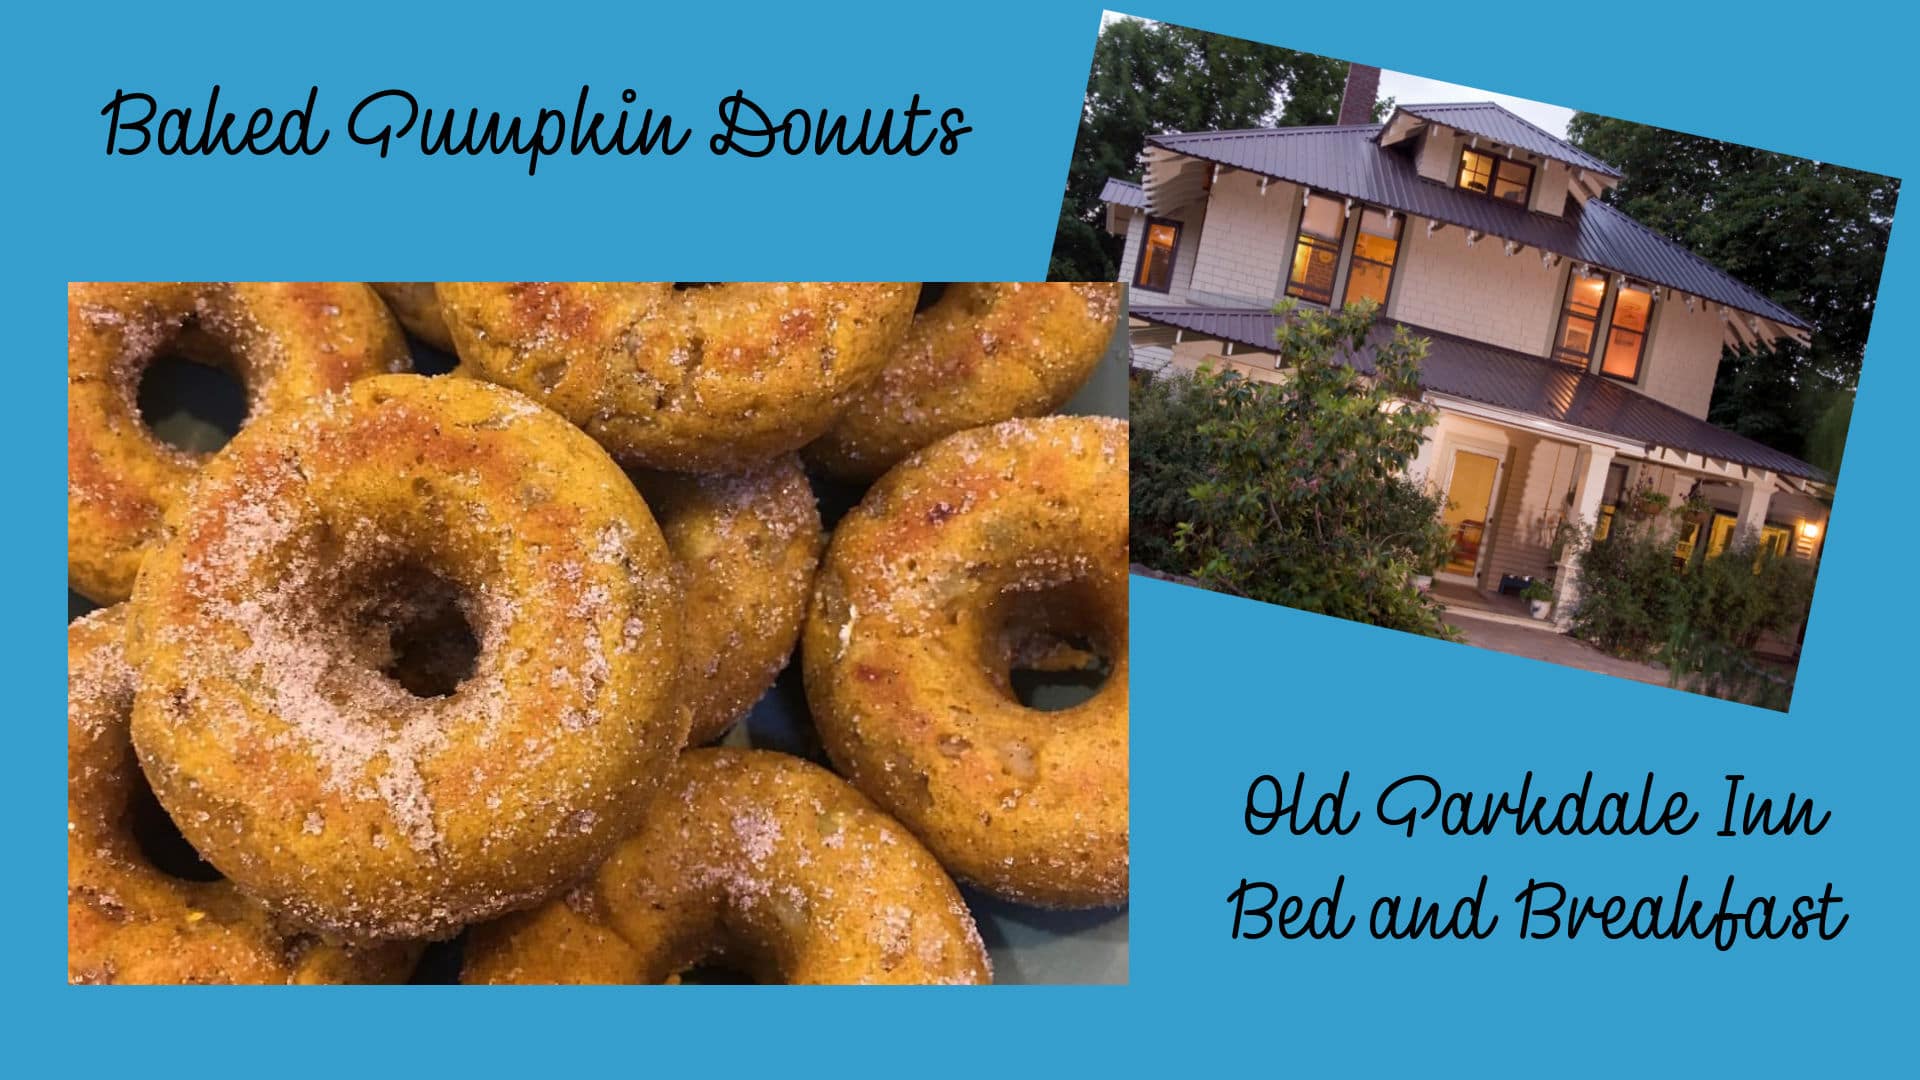 Baked Pumpkin Donuts at the Old Parkdale Inn Bed and Breakfast